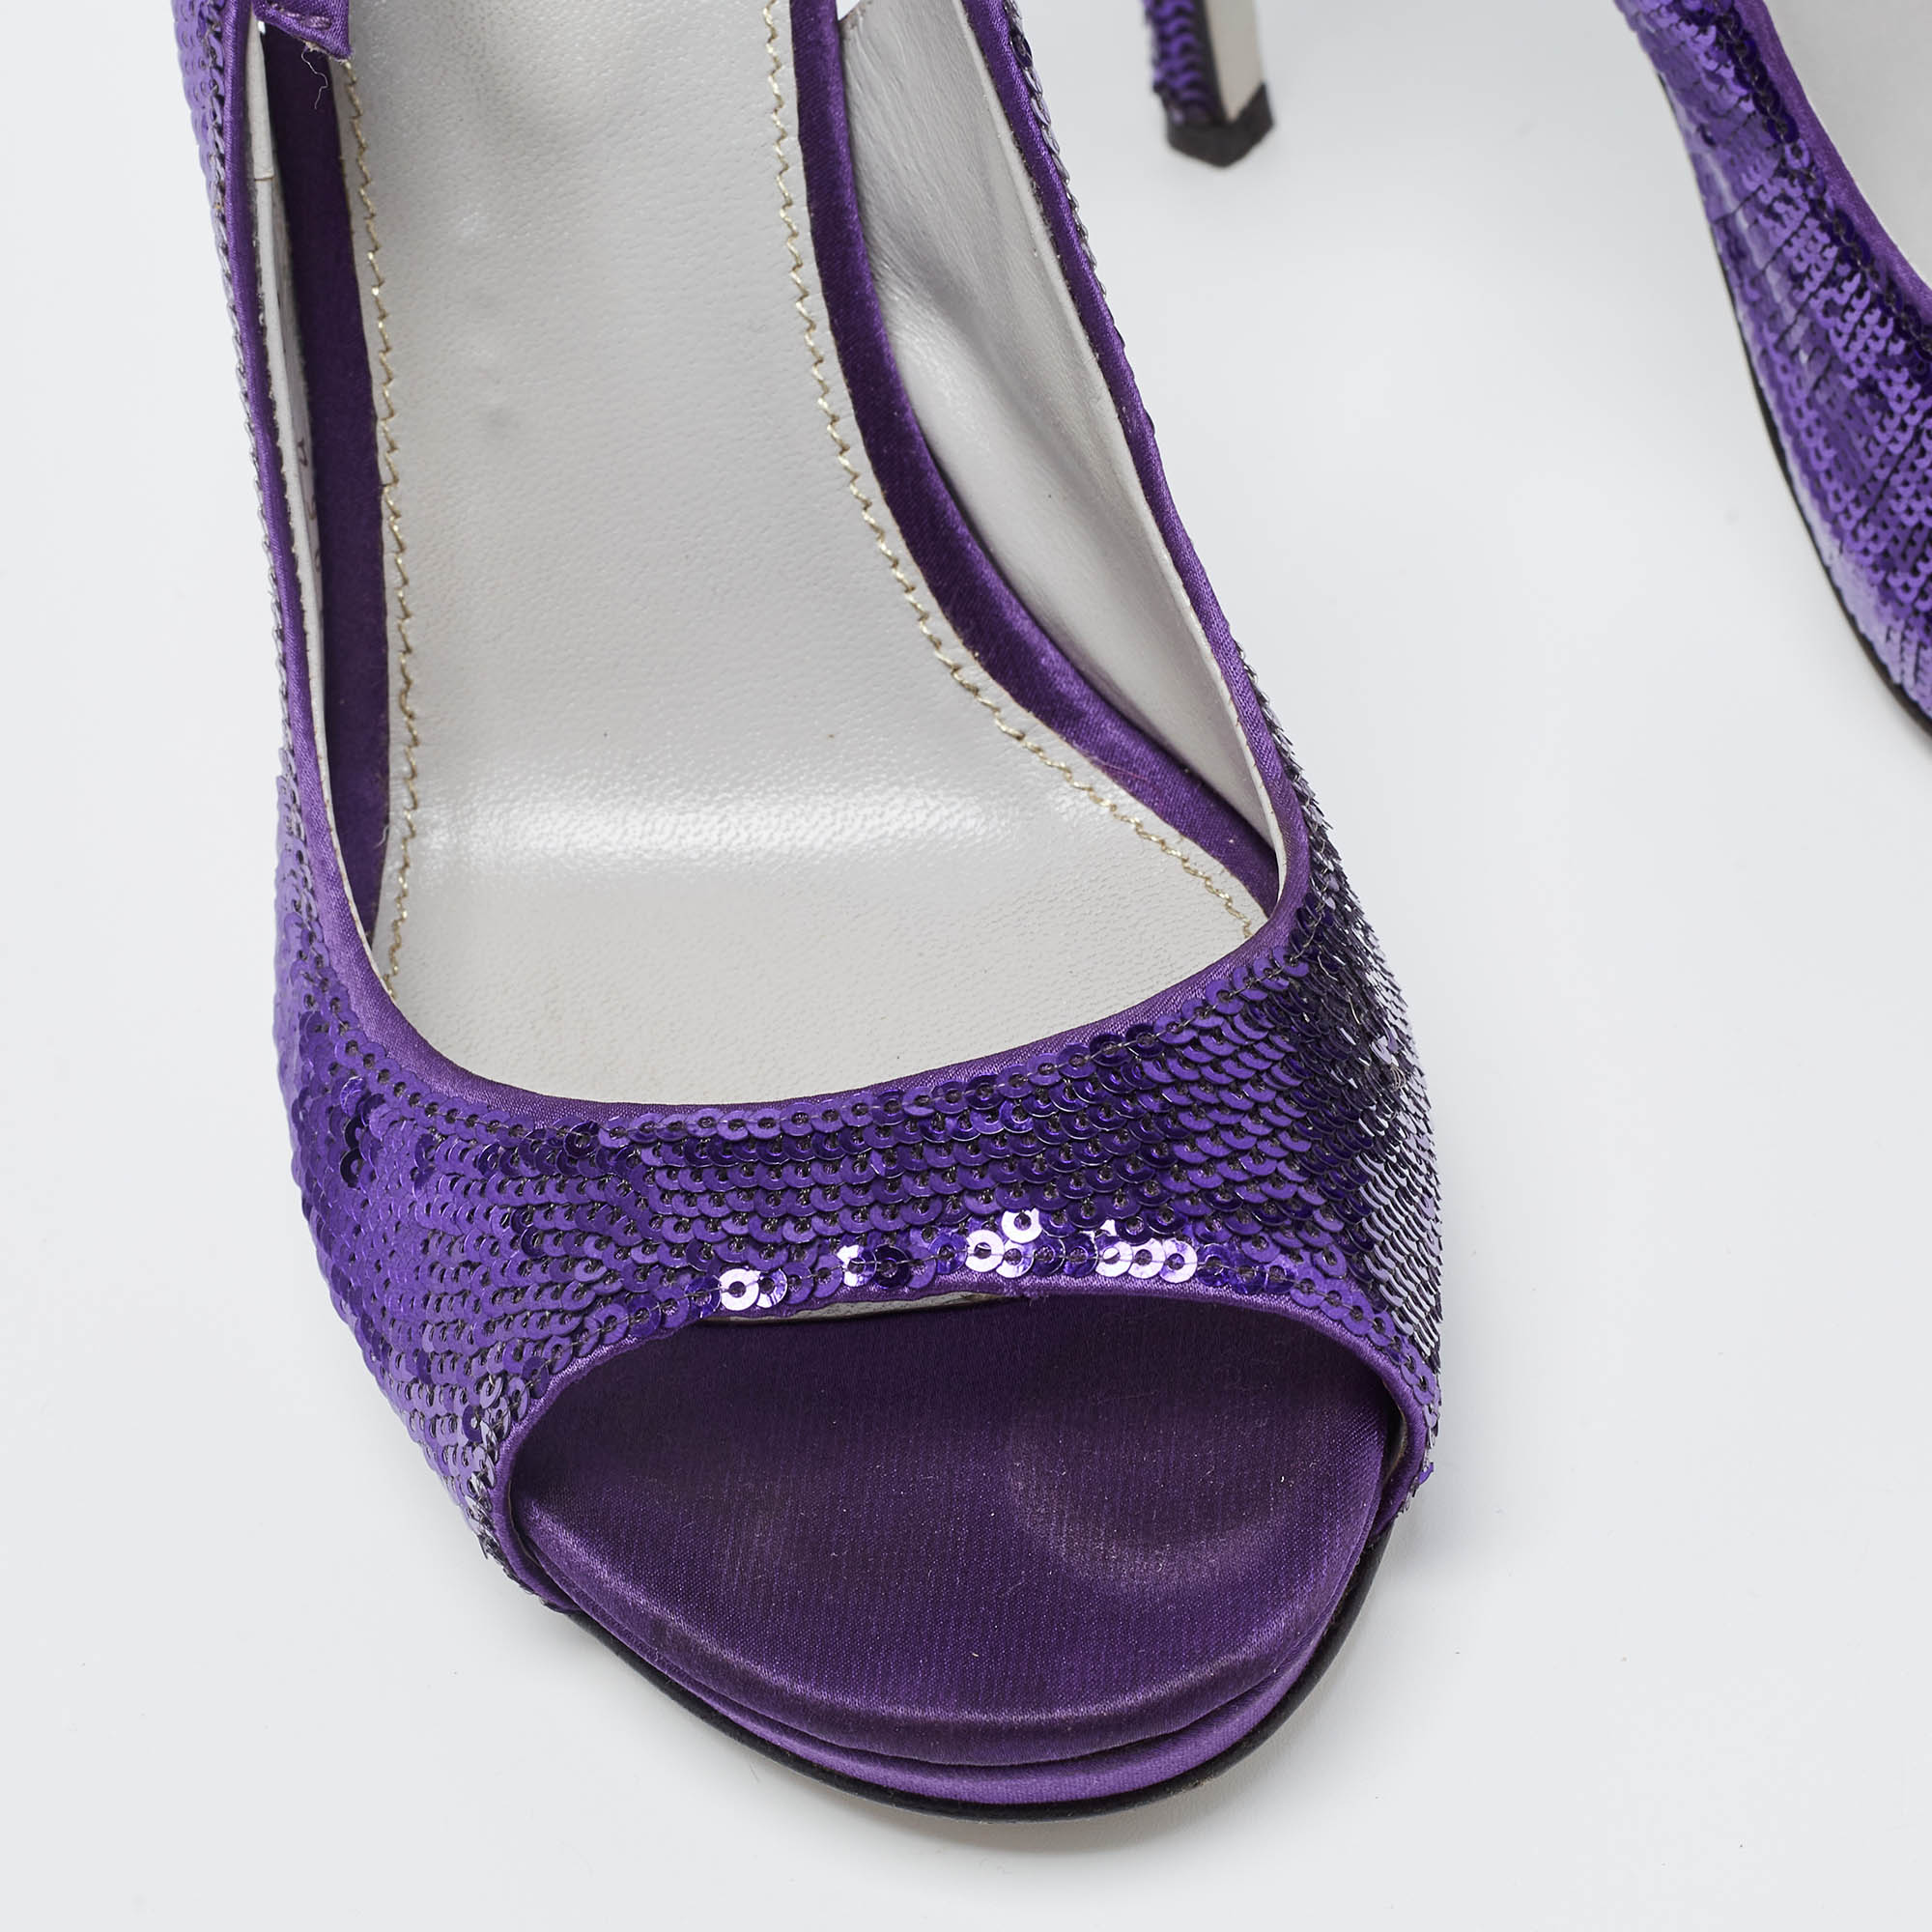 Sergio Rossi Purple Sequin And Satin Slingback Sandals Size 36